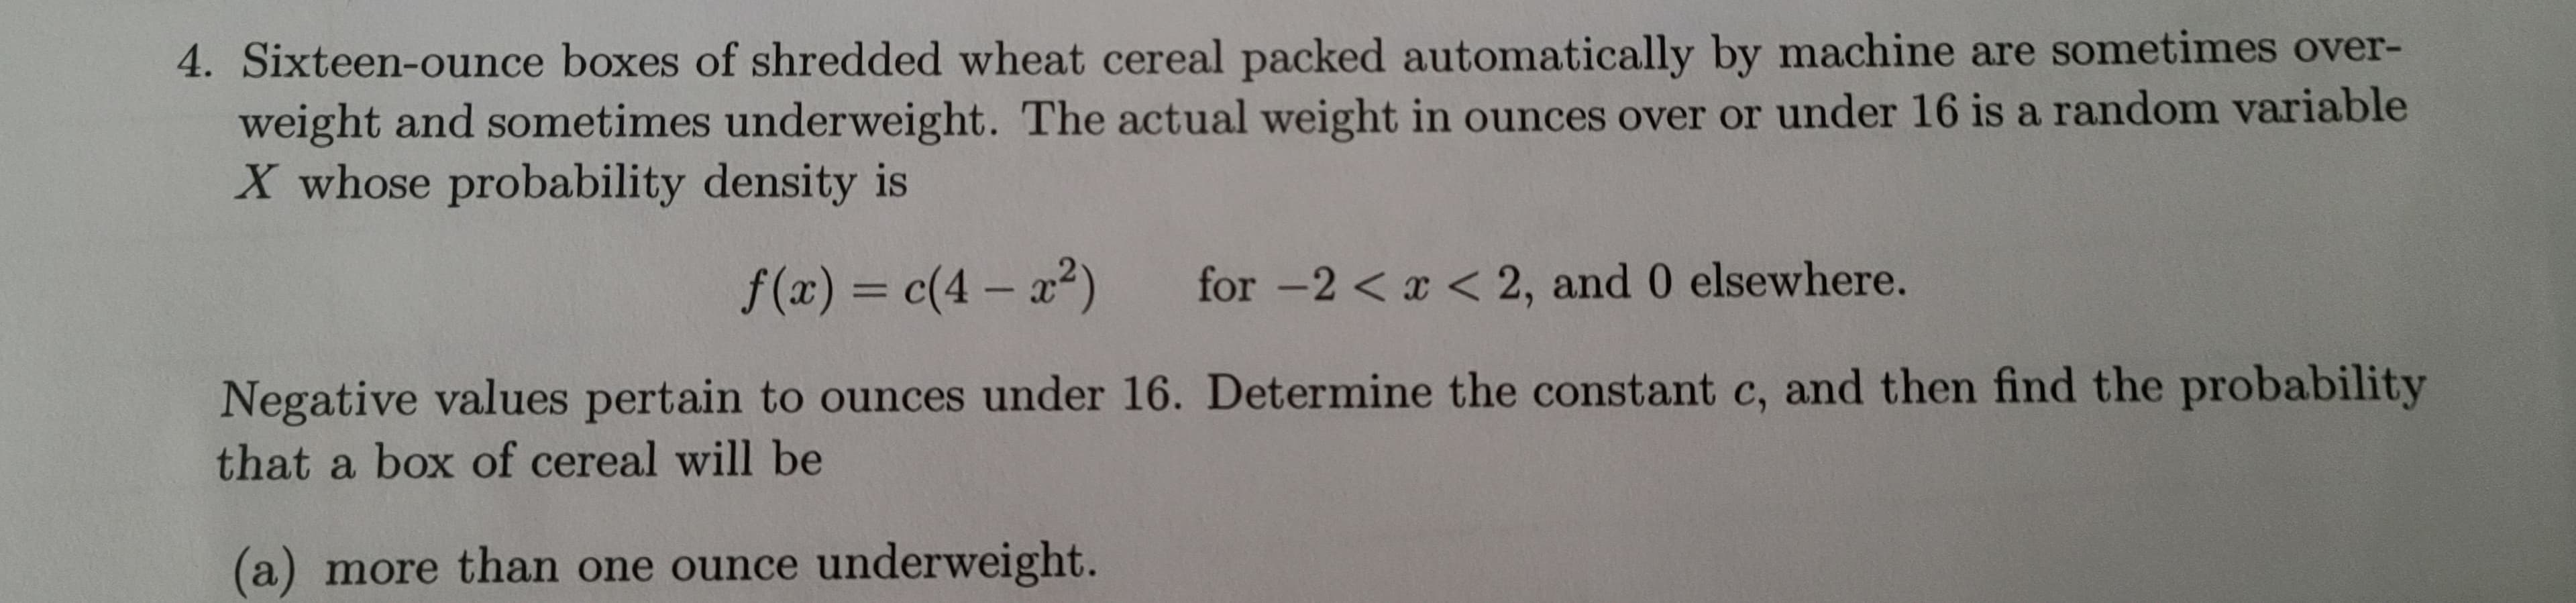 4. Sixteen-ounce boxes of shredded wheat cereal packed automatically by machine are sometimes over-
weight and sometimes underweight. The actual weight in ounces over or under 16 is a random variable
X whose probability density is
f(x) = c(4- x²) for -2 < x < 2, and 0 elsewhere.
Negative values pertain to ounces under 16. Determine the constant c, and then find the probability
that a box of cereal will be
(a) more than one ounce underweight.